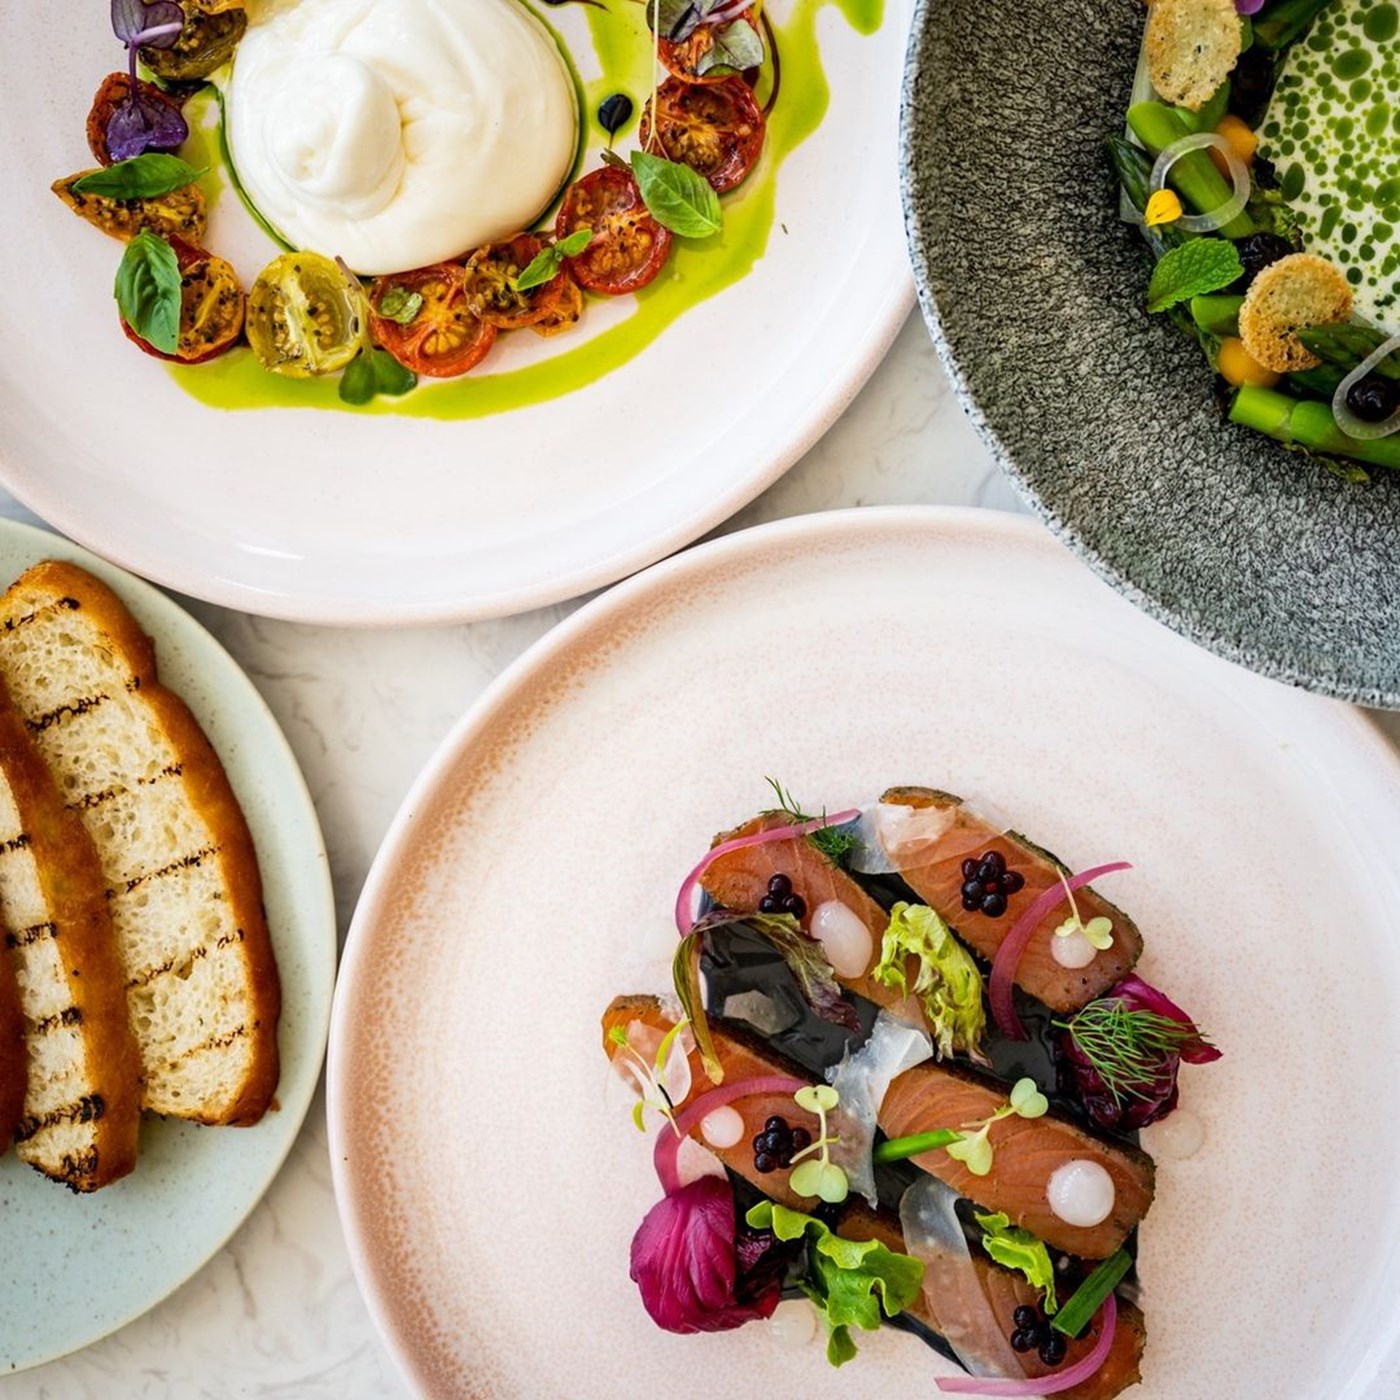 Four plates on a table, featuring fresh seafood, bread, burrata and vegetables.